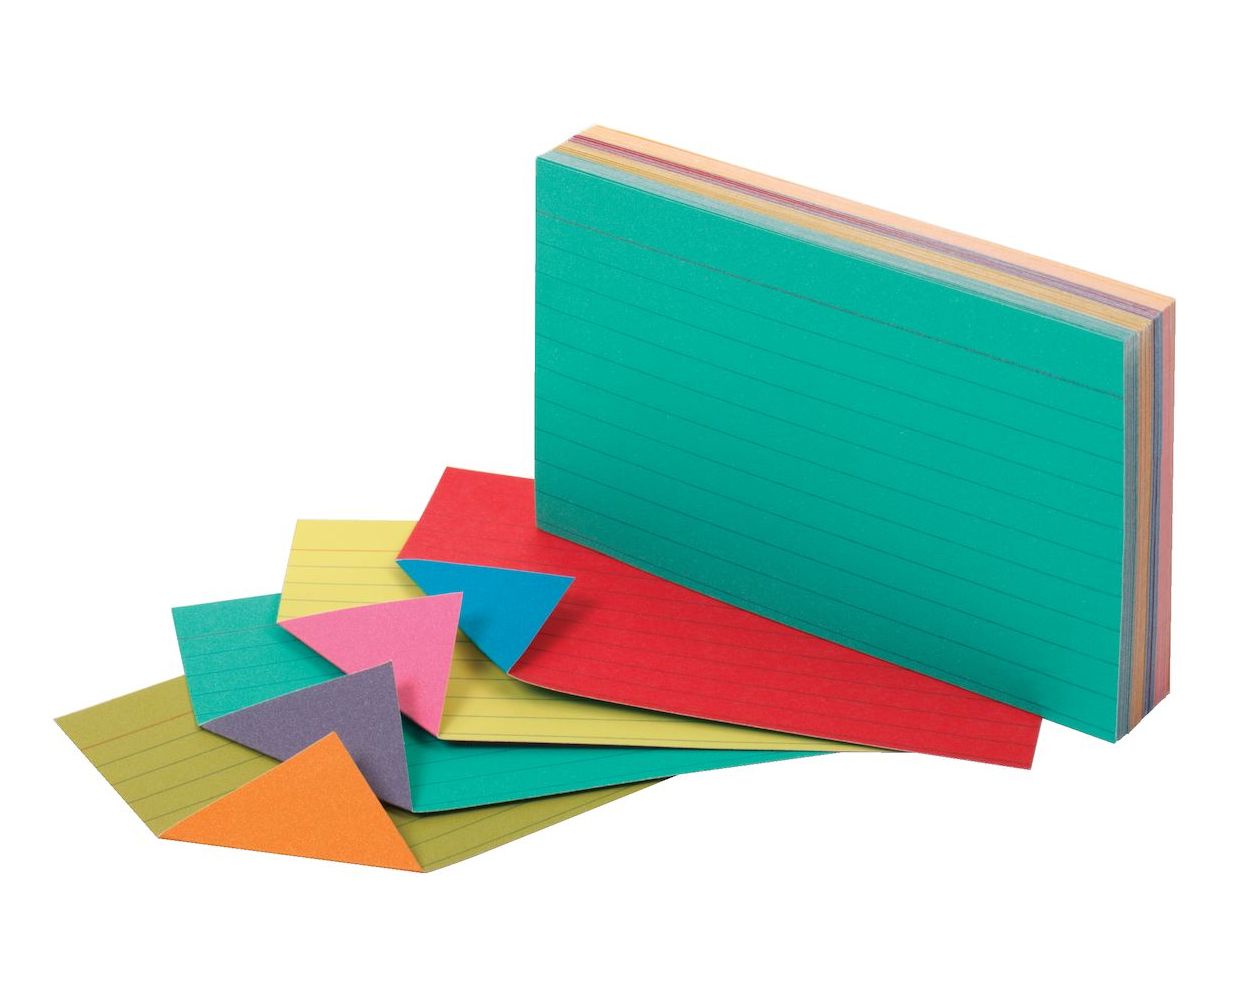 Oxford® Two-Tone Index Cards, 3 x 5, Assorted Colors, 100 per pack